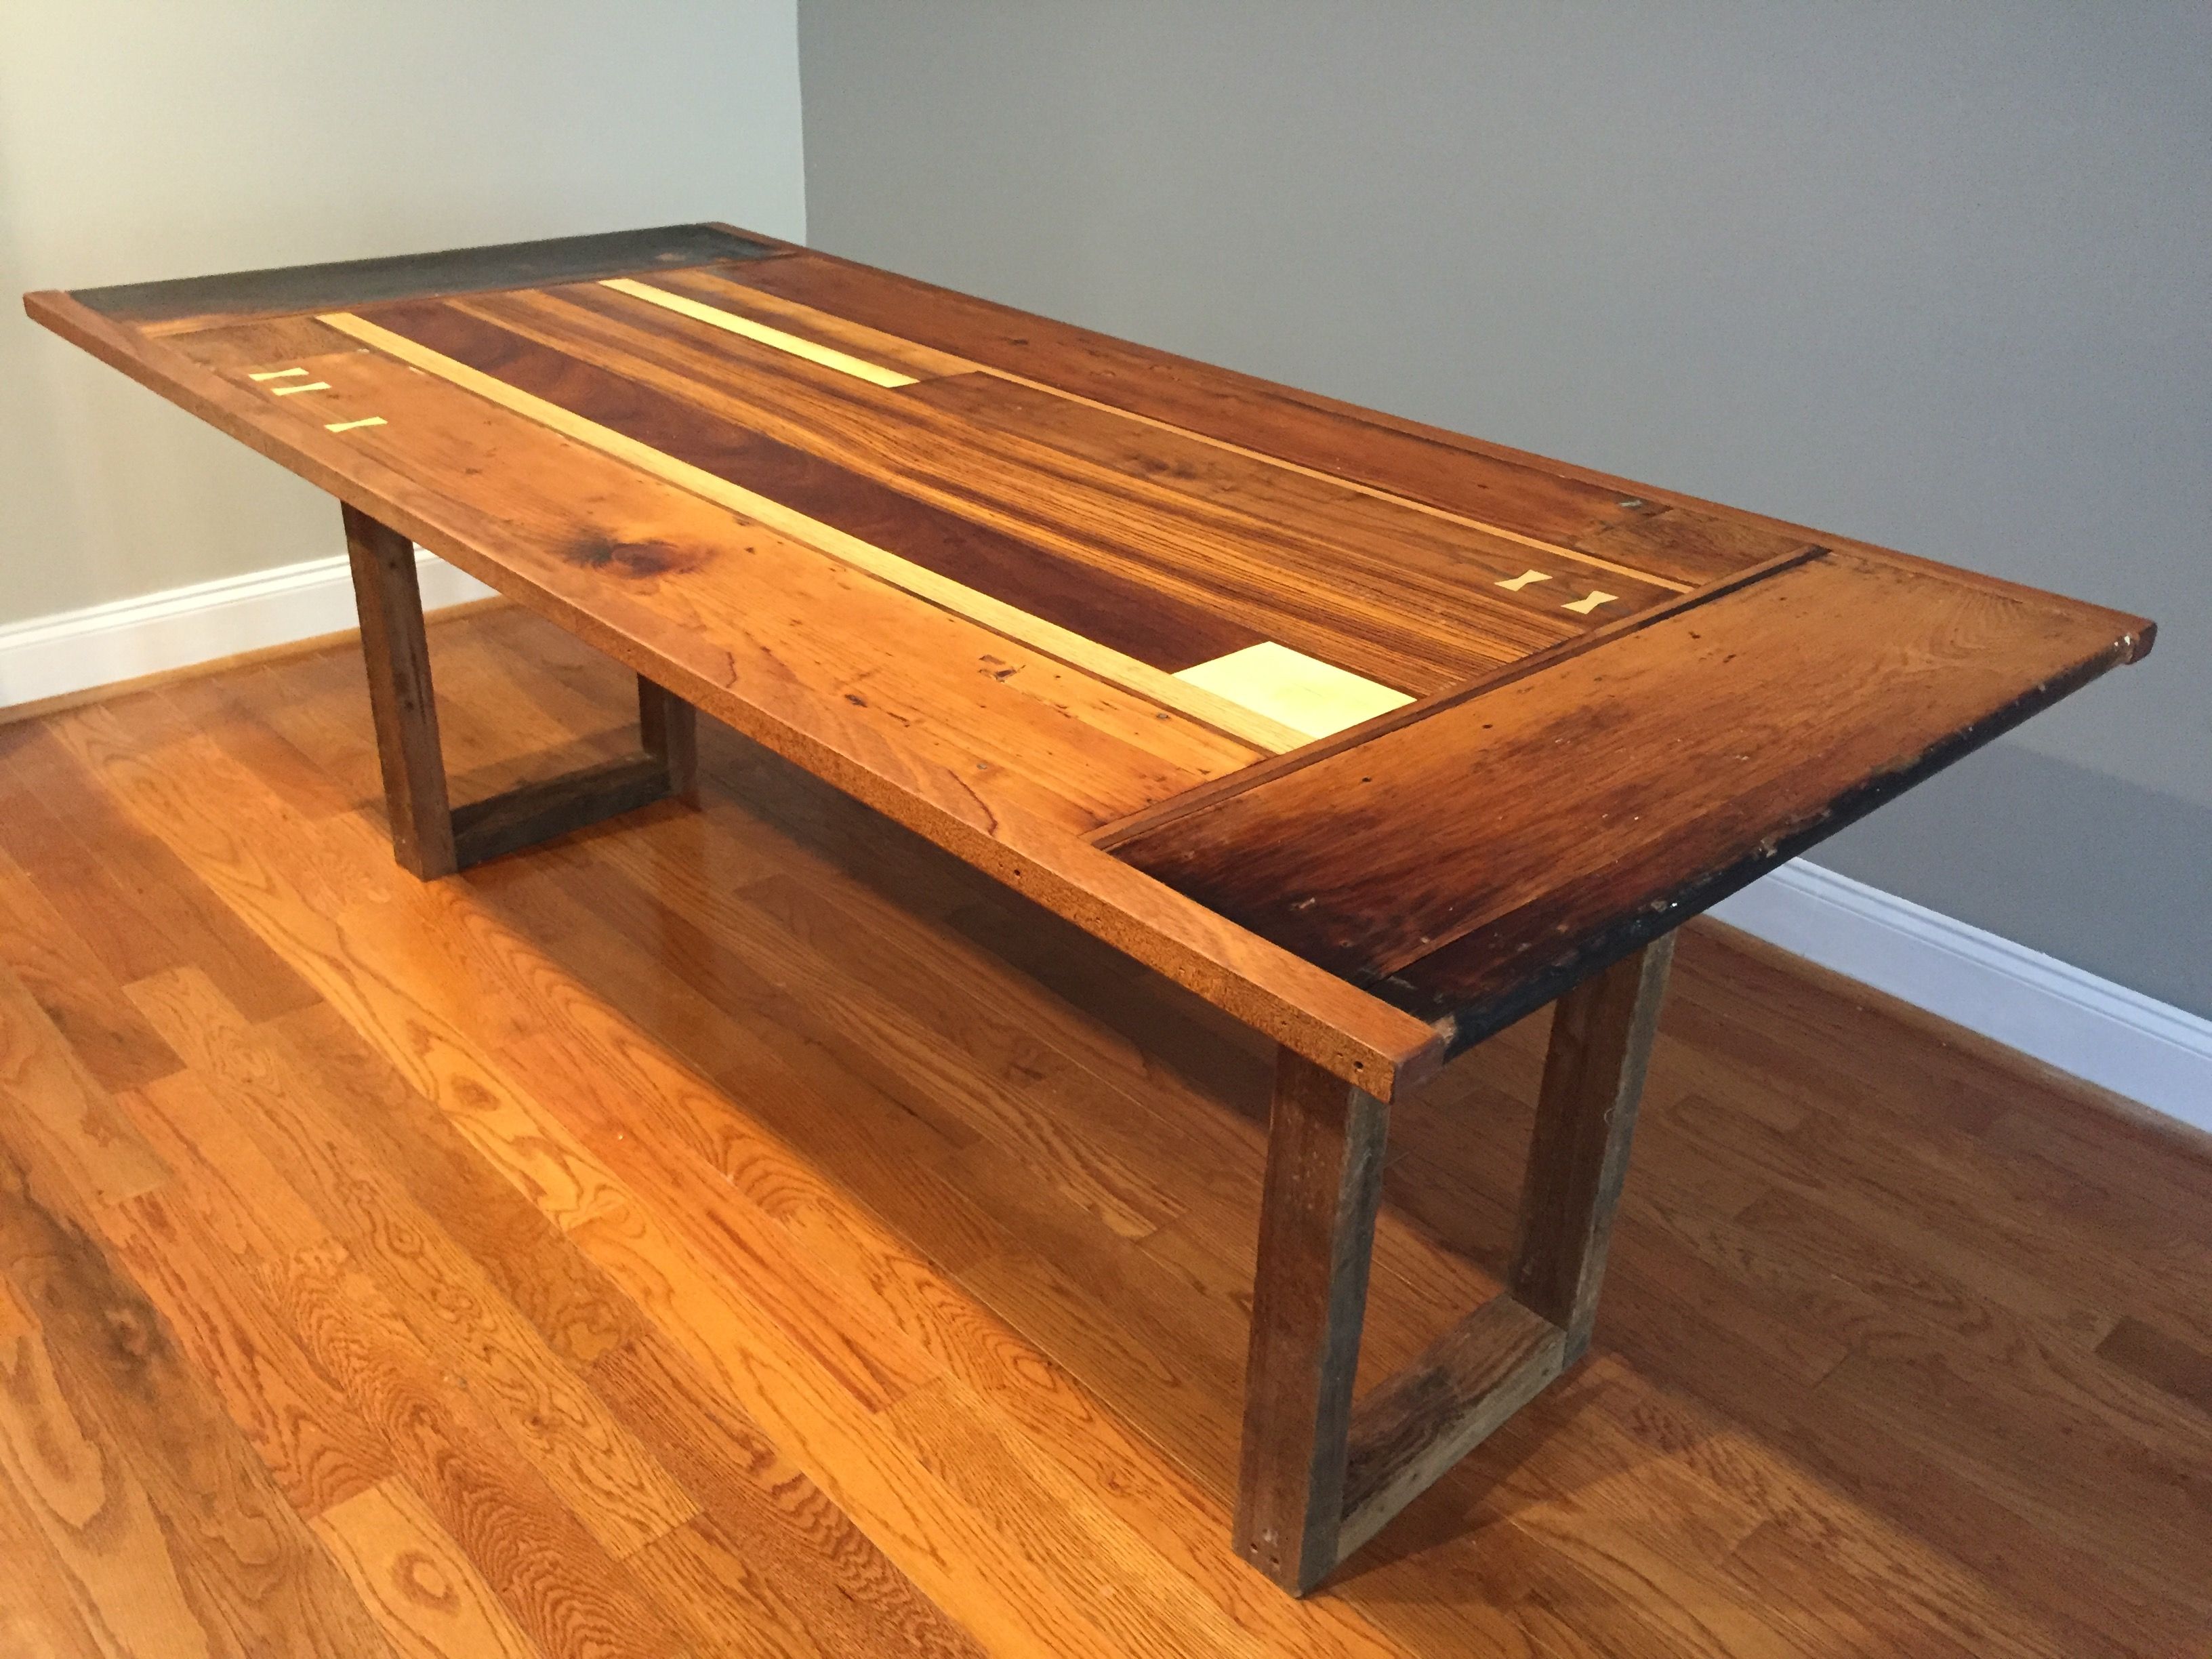 Hand Made Dining Room Table With Reclaimed Wood. by Michael Xander